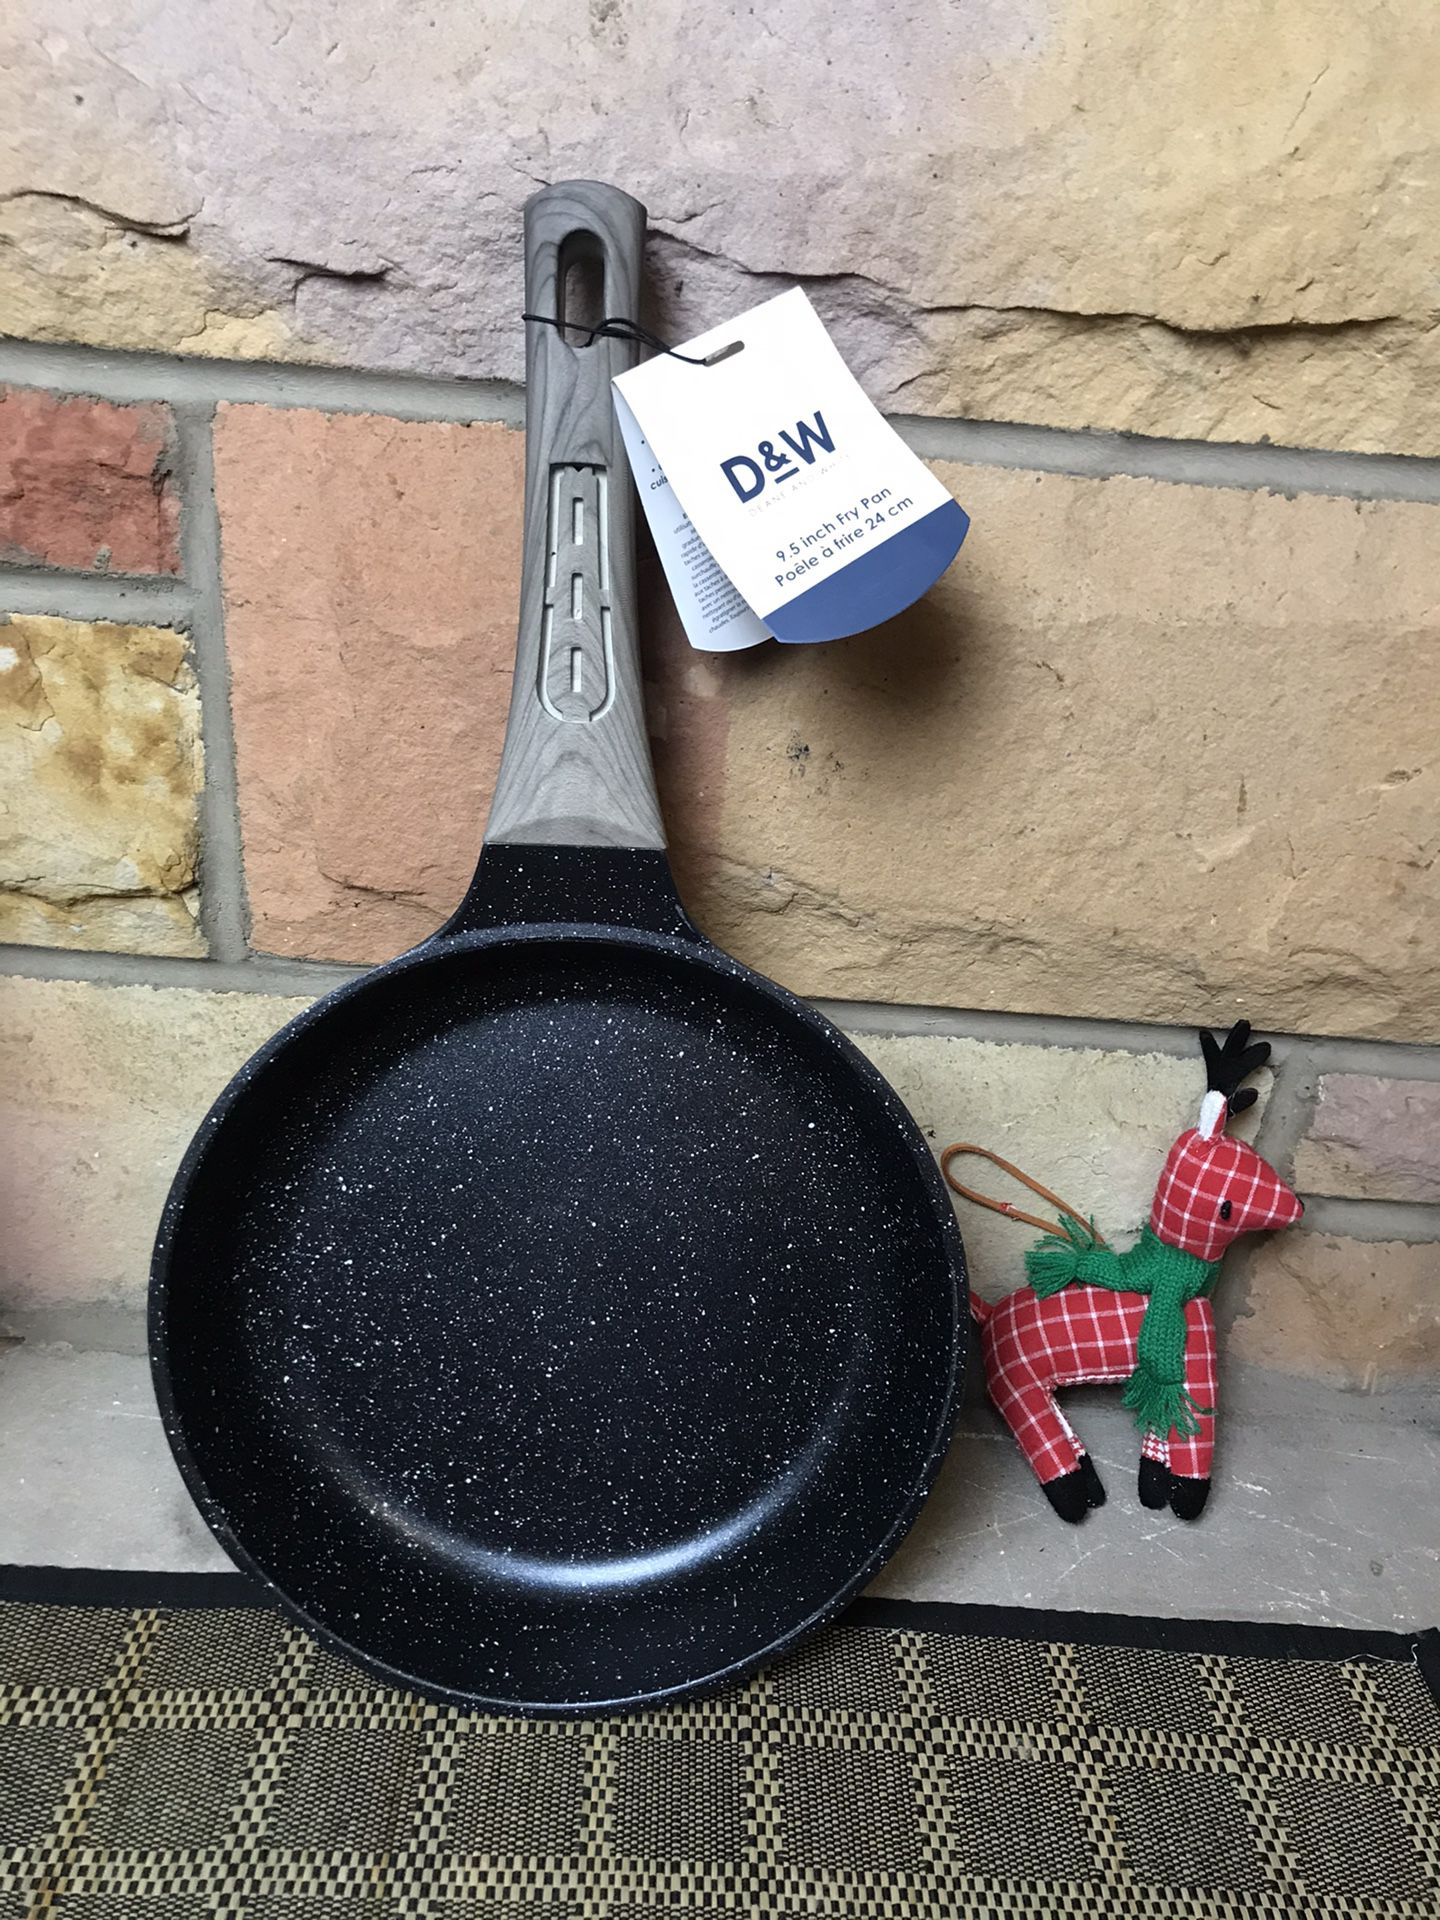 D&W Frying Pan Nonstick Medium Skillet 9.5 inch Quality Cookware  Deane&White New for Sale in New York, NY - OfferUp